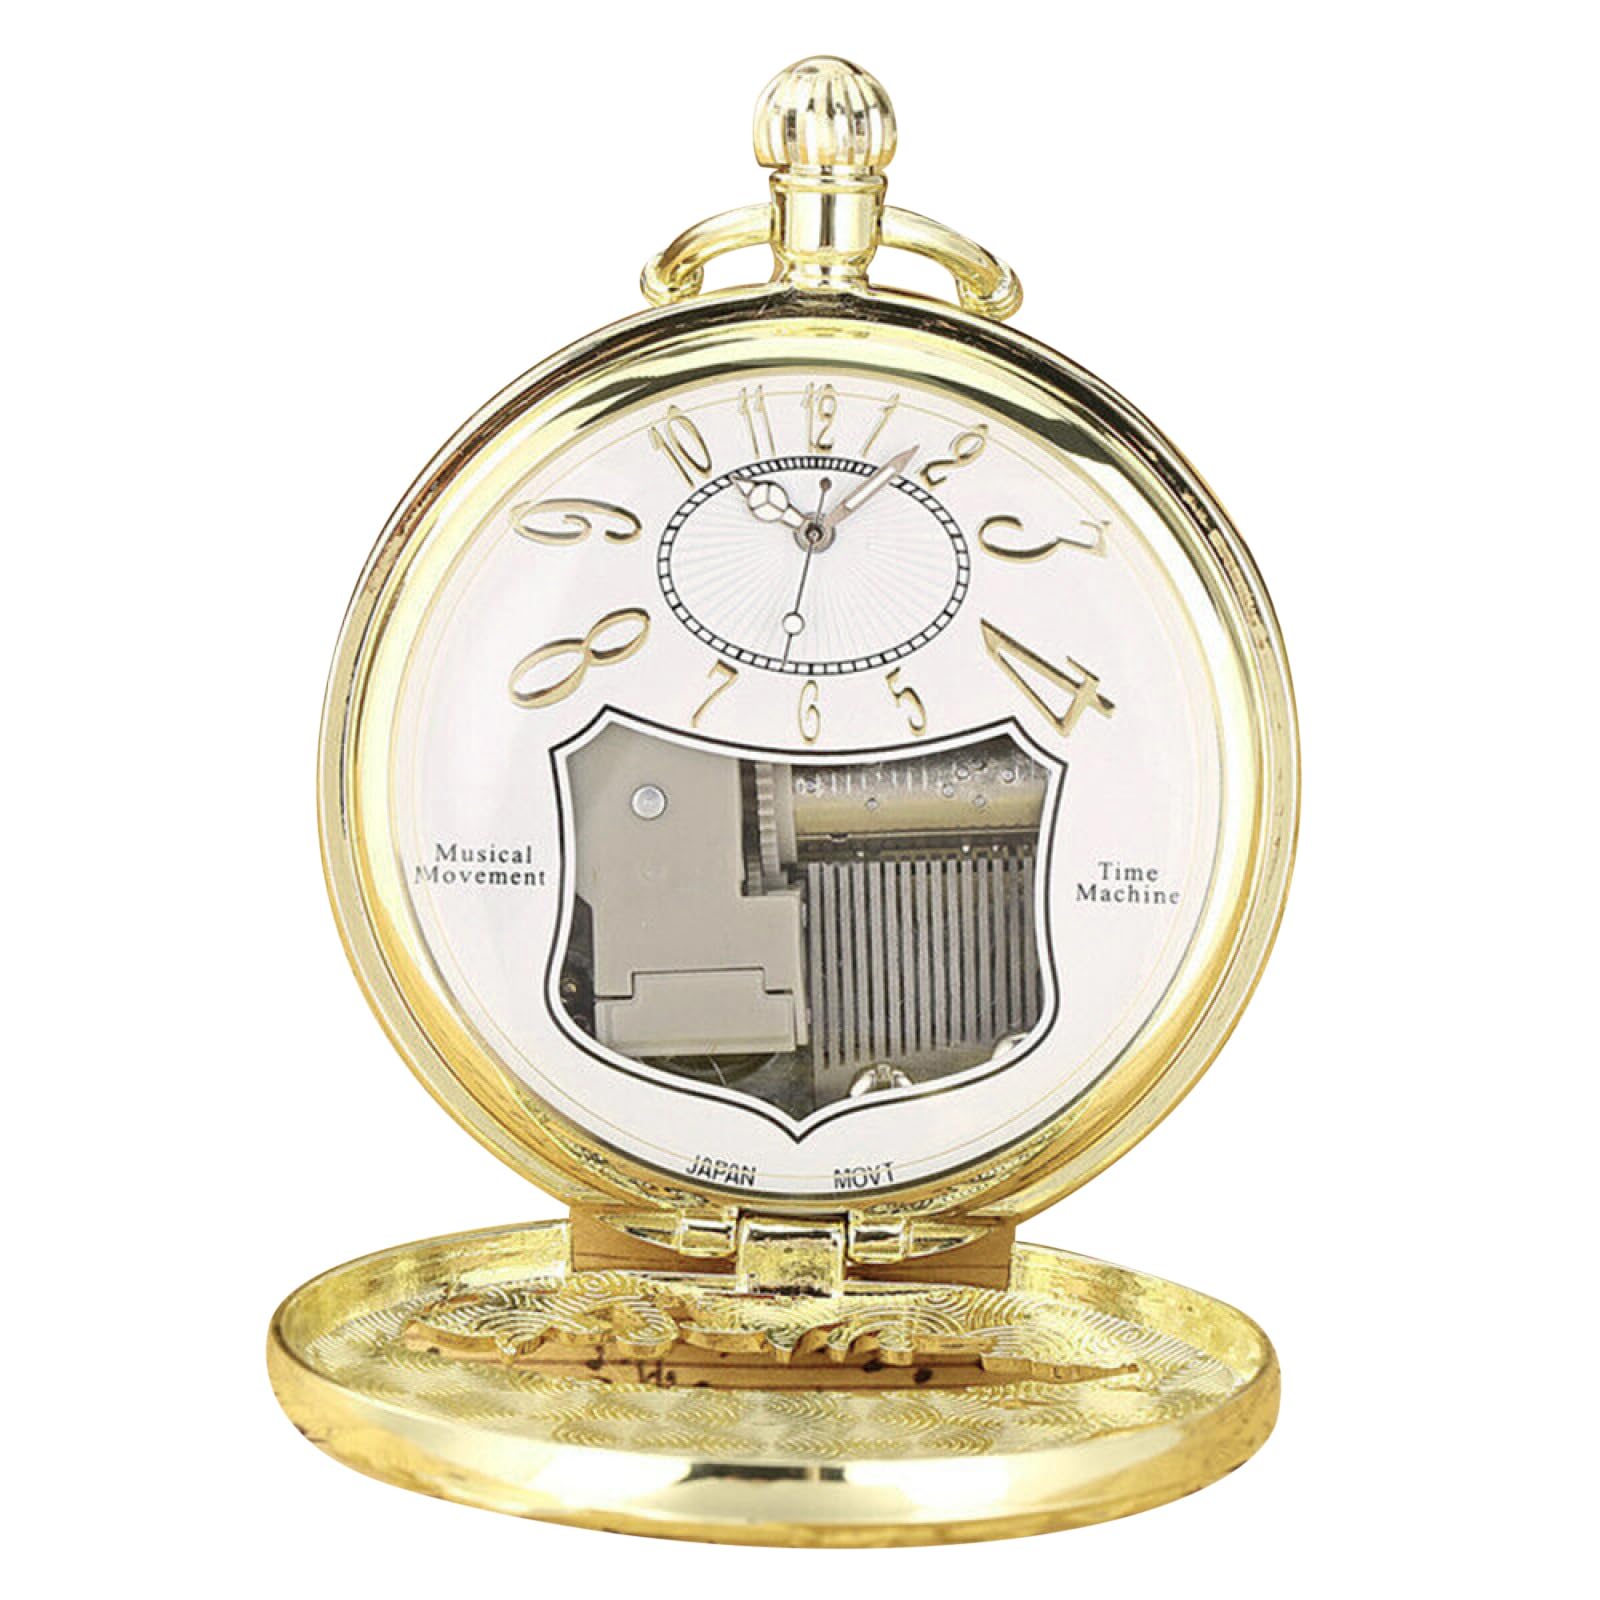 TECKEEN Music Pocket Watch, Can Play The Music, Vintage Time Pocket Watch Movement Running Train On Case